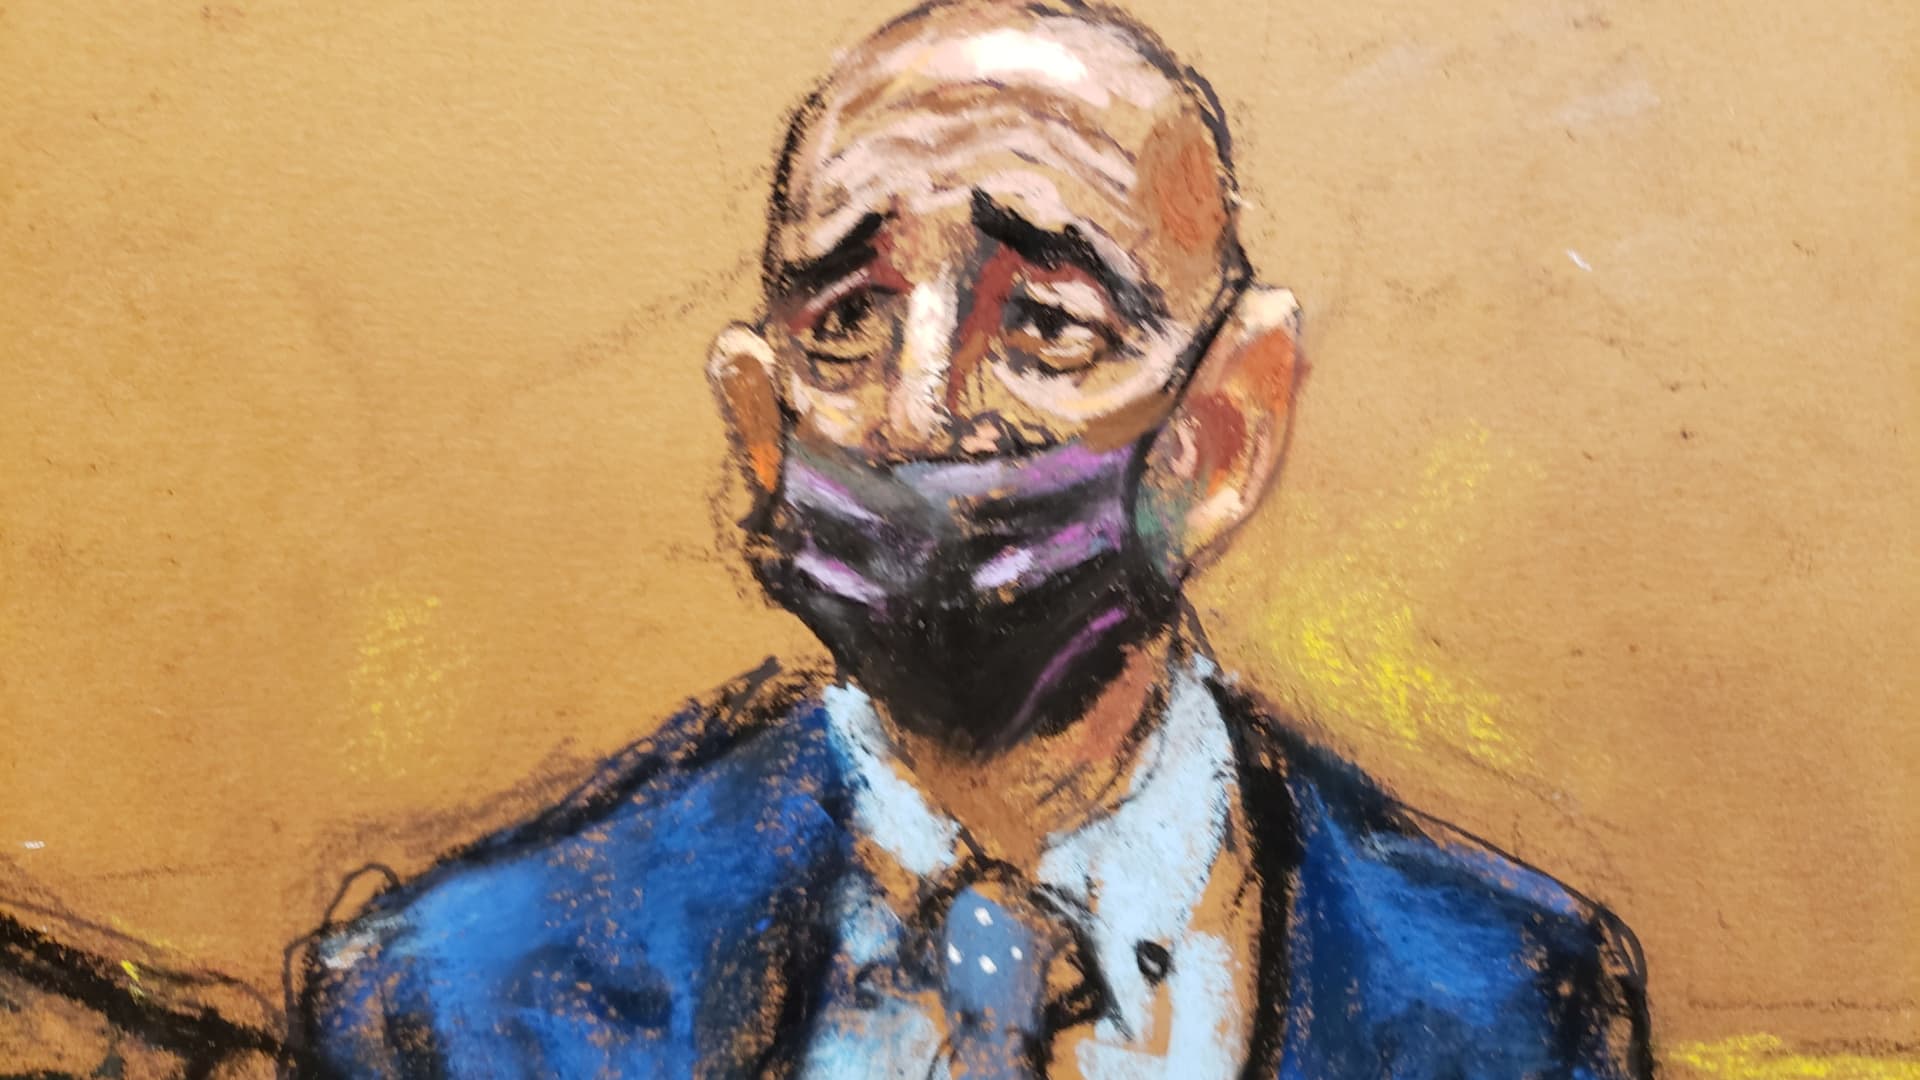 Thomas Barrack, a billionaire friend of Donald Trump who chaired the former president's inaugural fund, stands during his arraignment hearing at the Brooklyn Federal Courthouse in Brooklyn, New York, U.S., July 26, 2021 in this courtroom sketch.